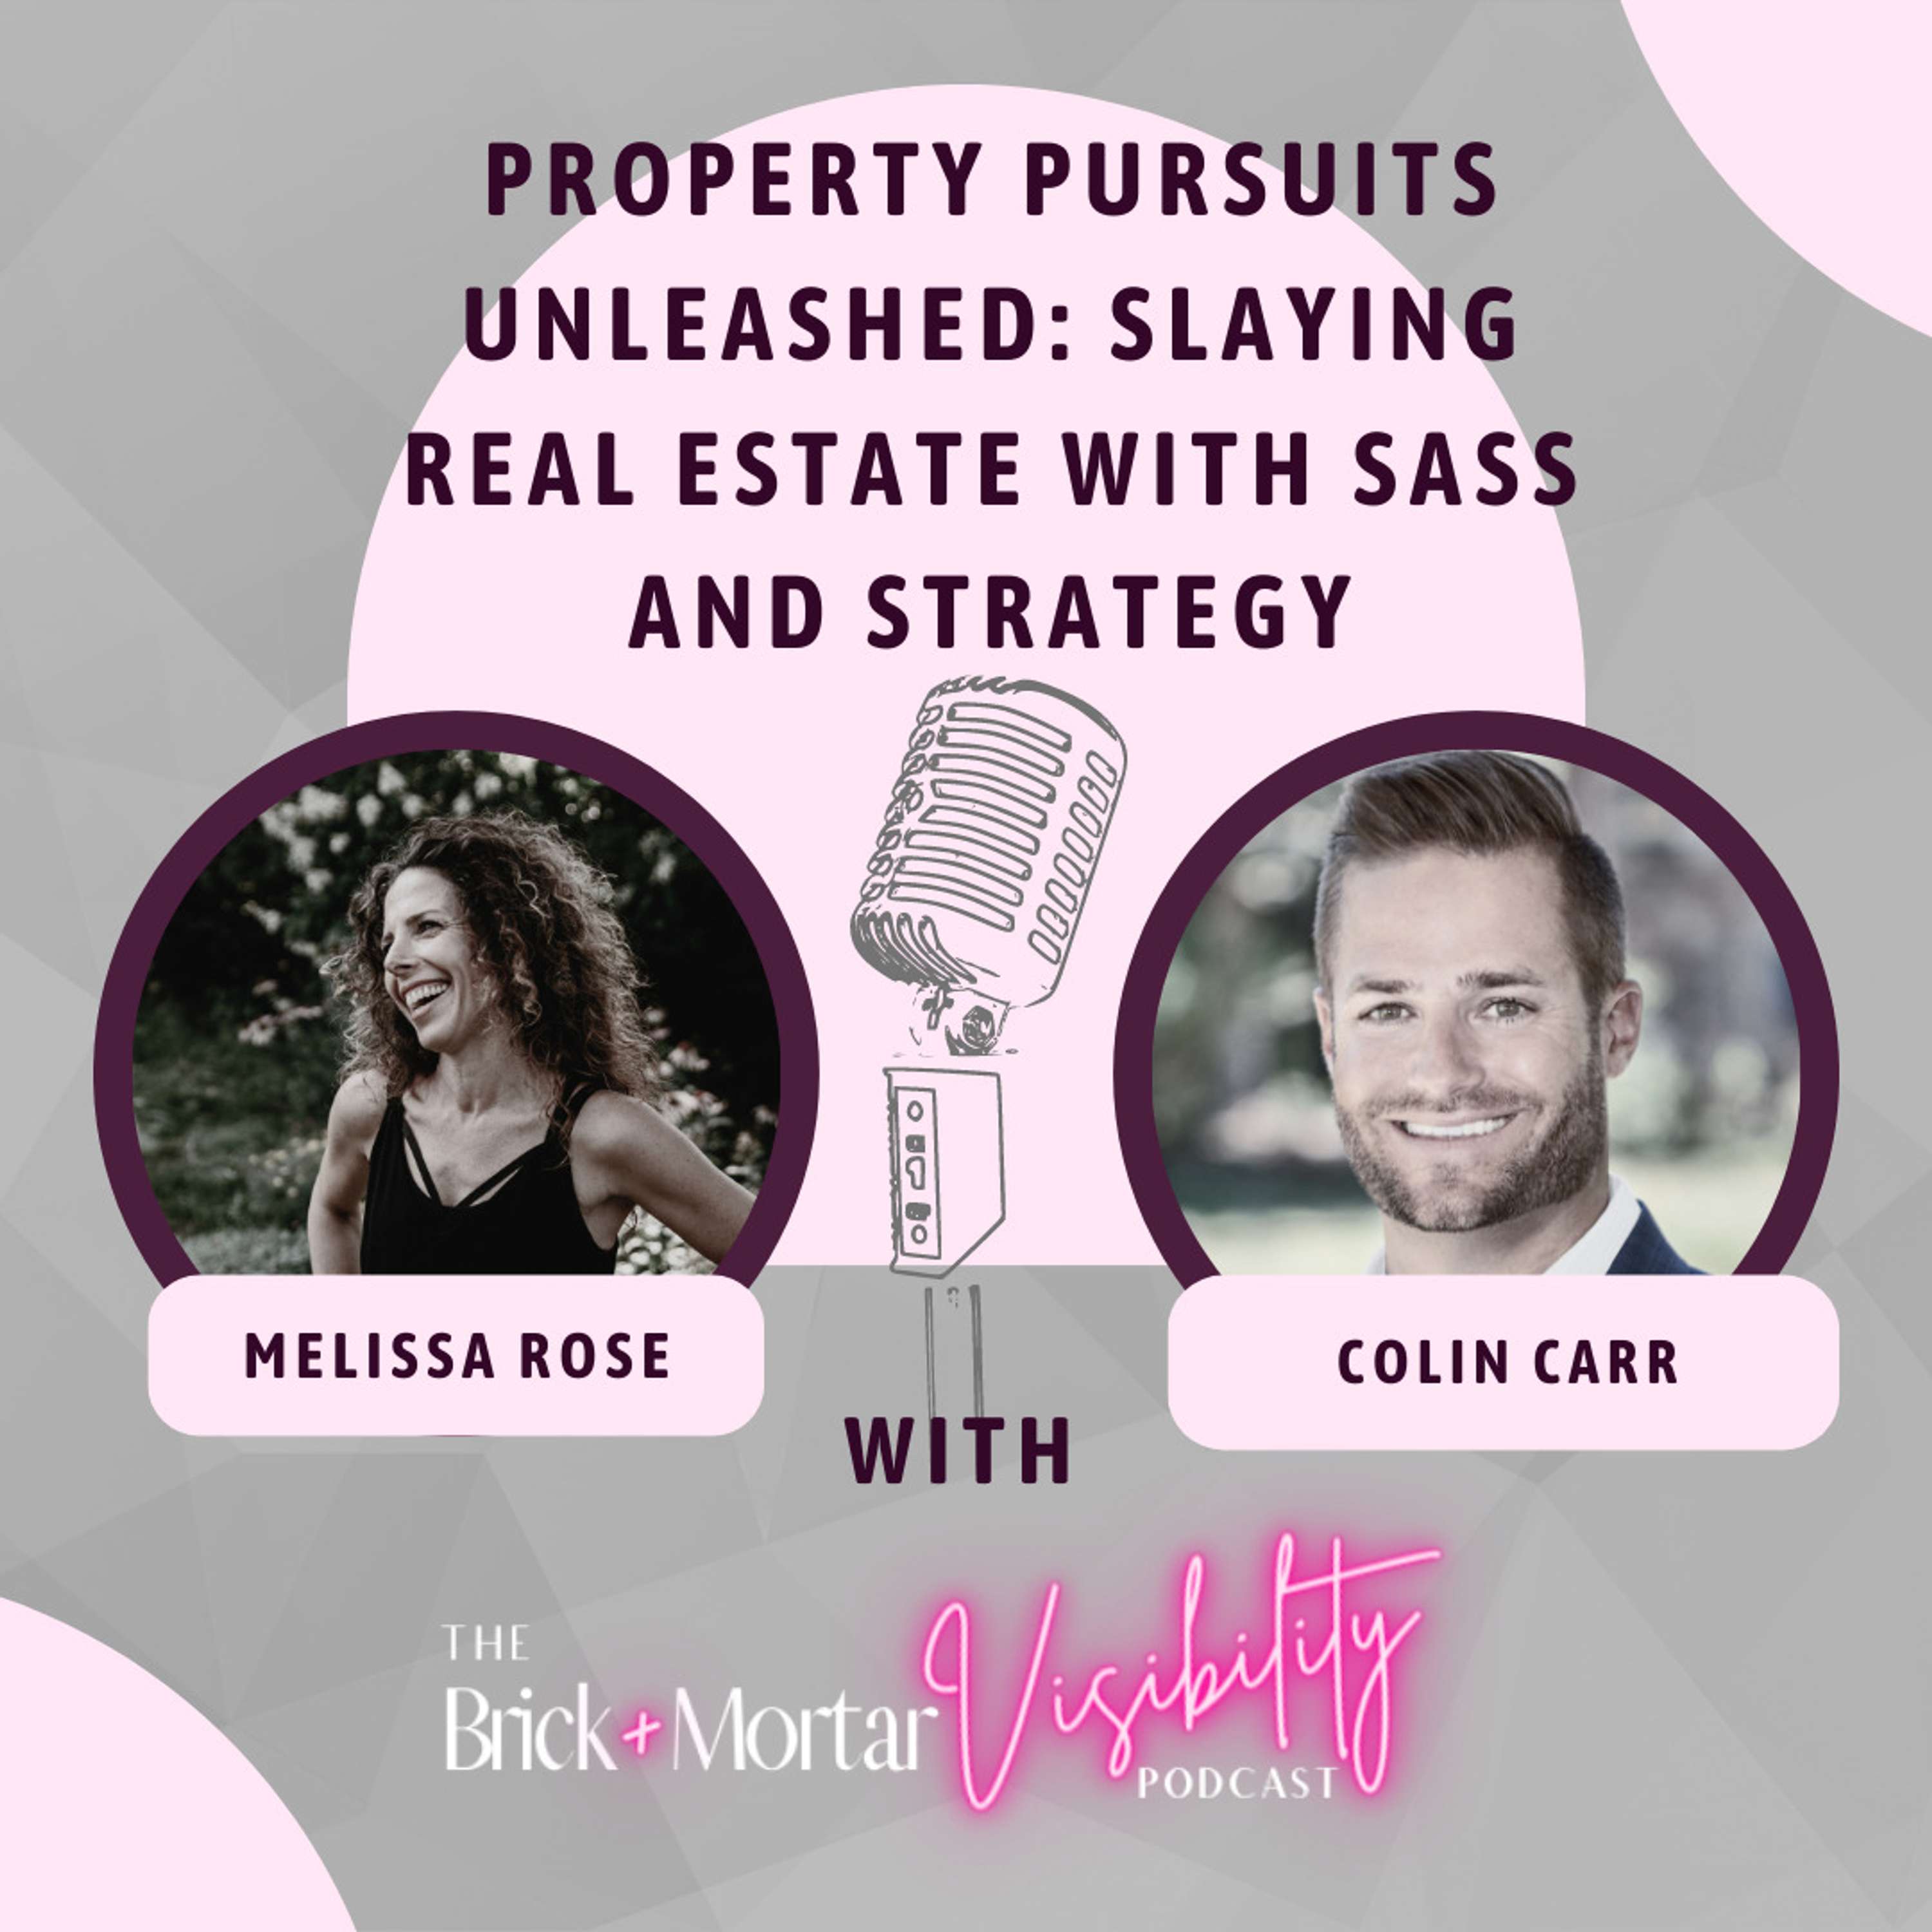 Property Pursuits Unleashed: Slaying Real Estate with Sass and Strategy with Colin Carr